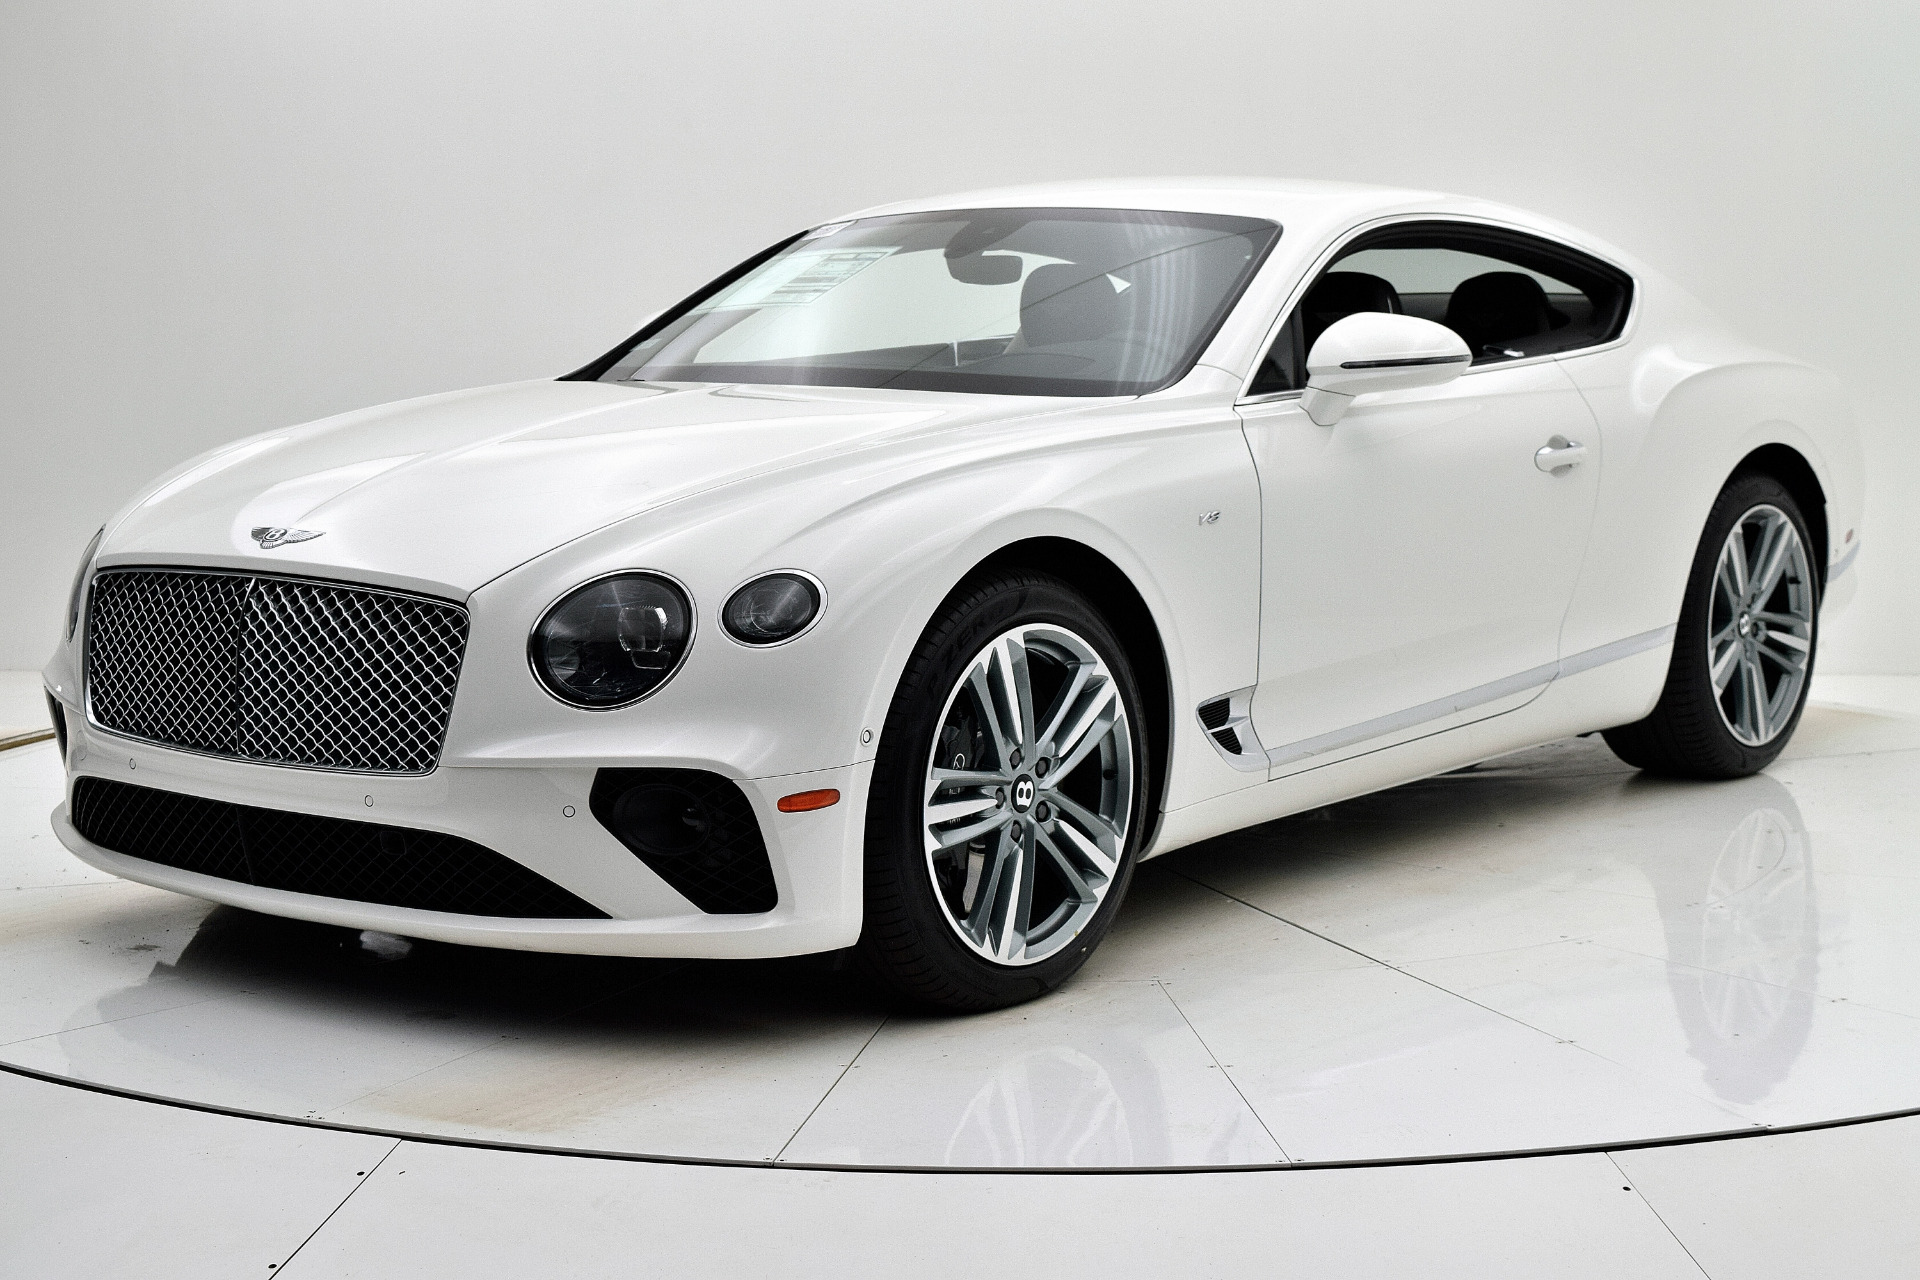 New 2021 Bentley Continental GT V8 Coupe For Sale ($233,950) | Bentley  Palmyra N.J. Stock #21BE137